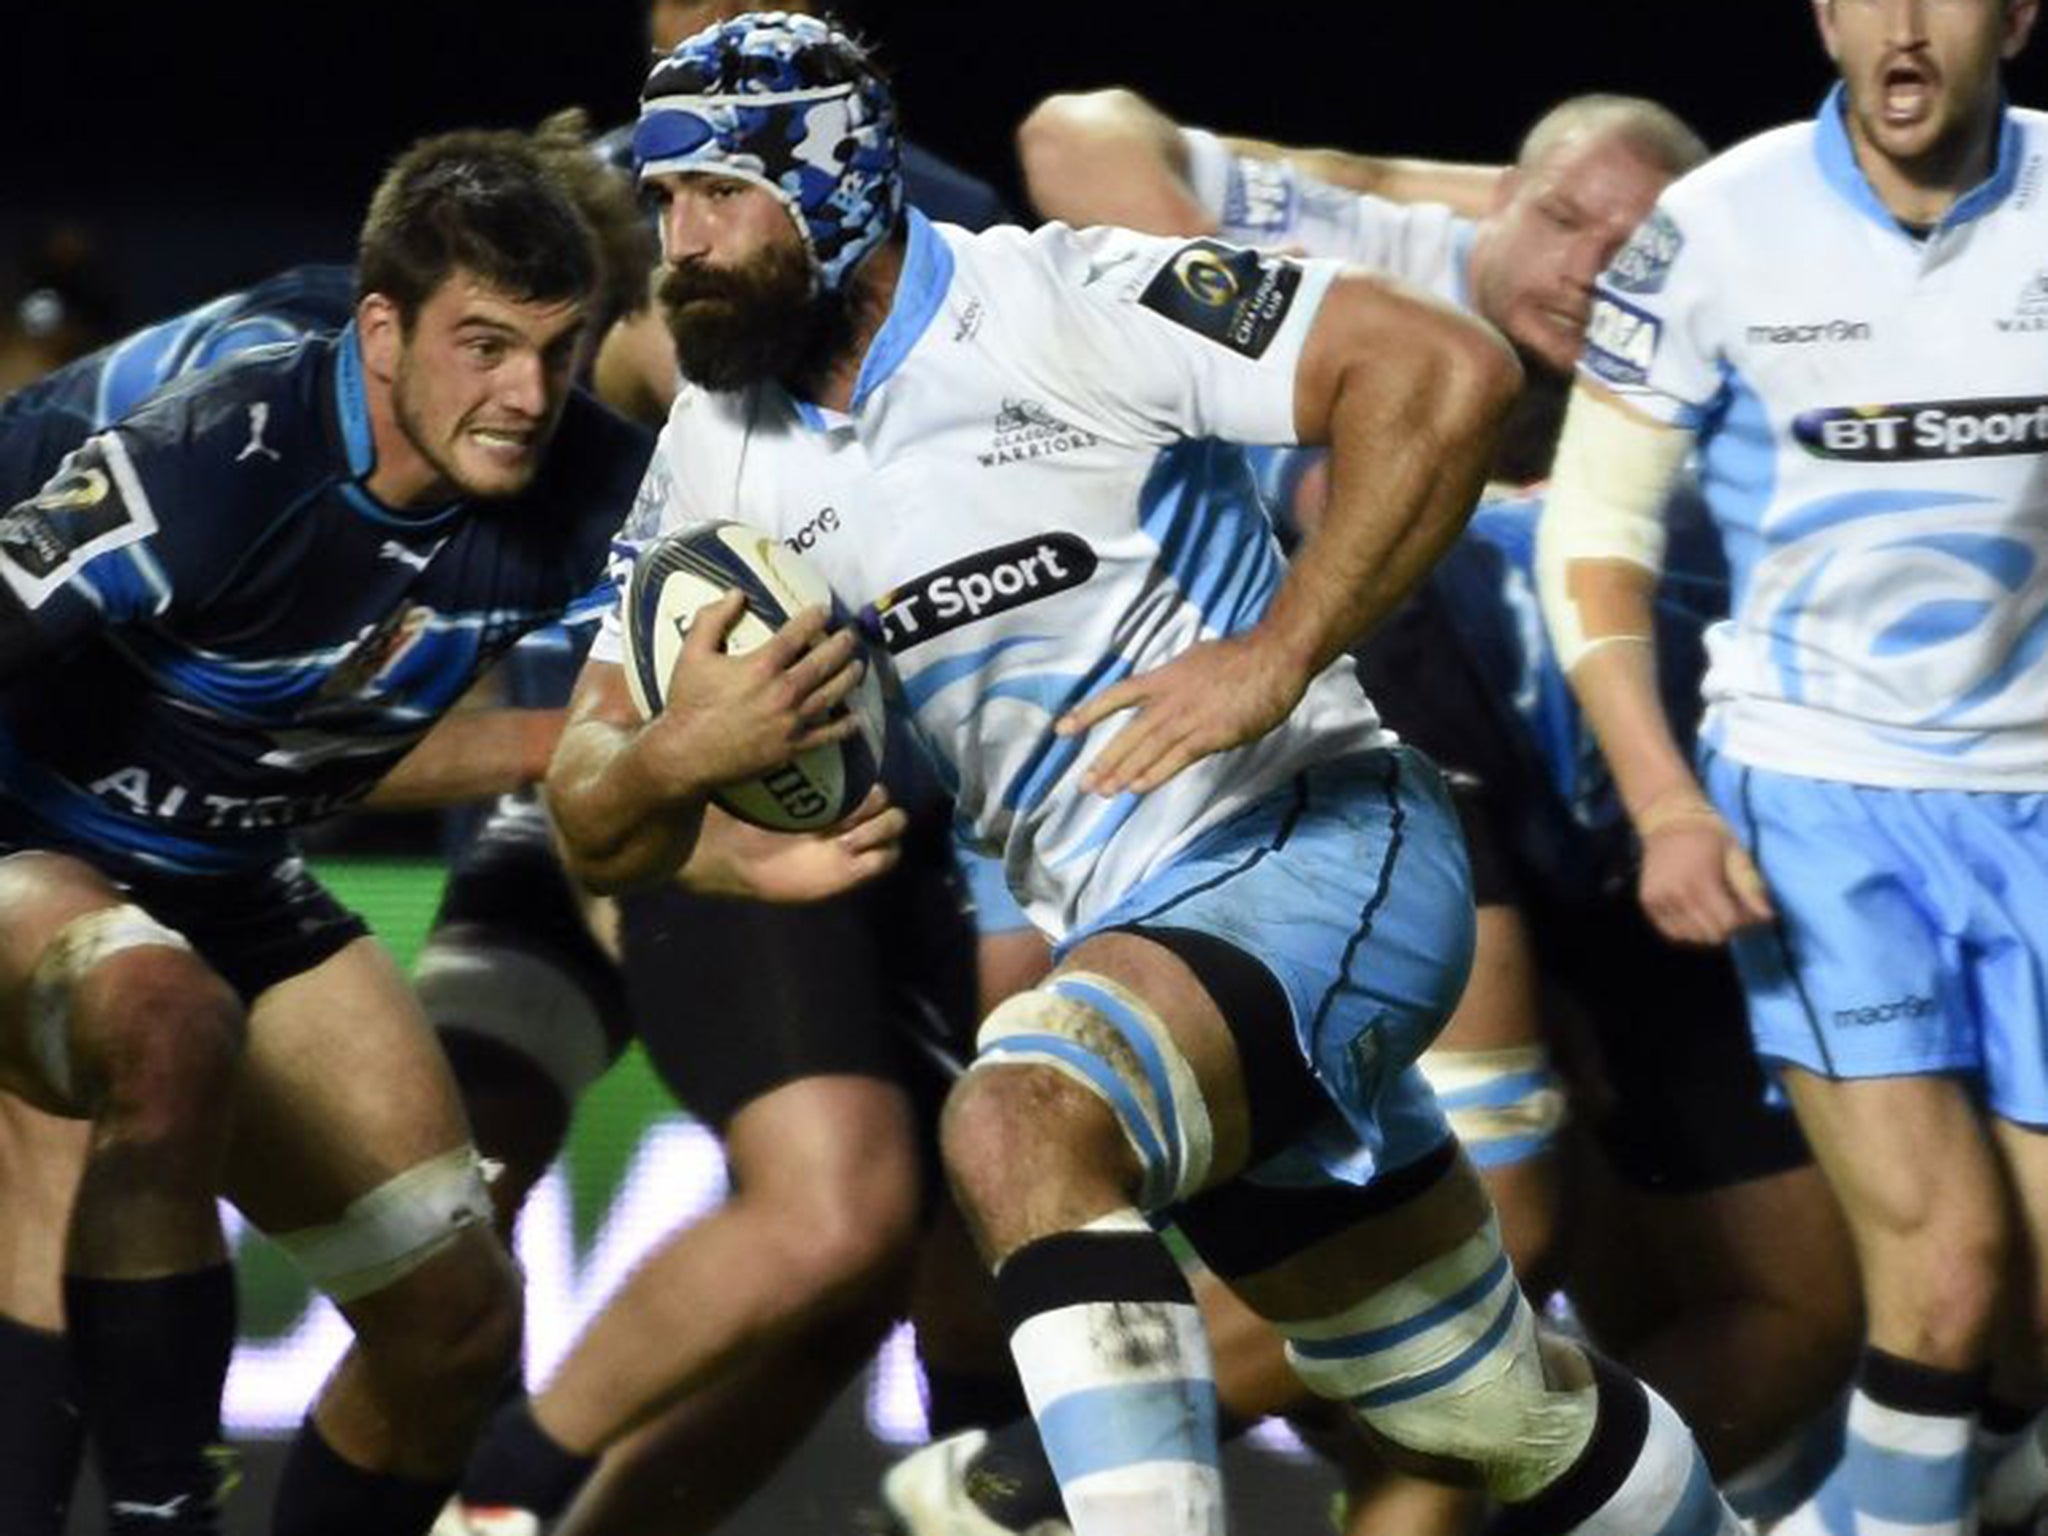 Josh Strauss was part of the Glasgow Warriors side that won the Pro12 title for the first time last season